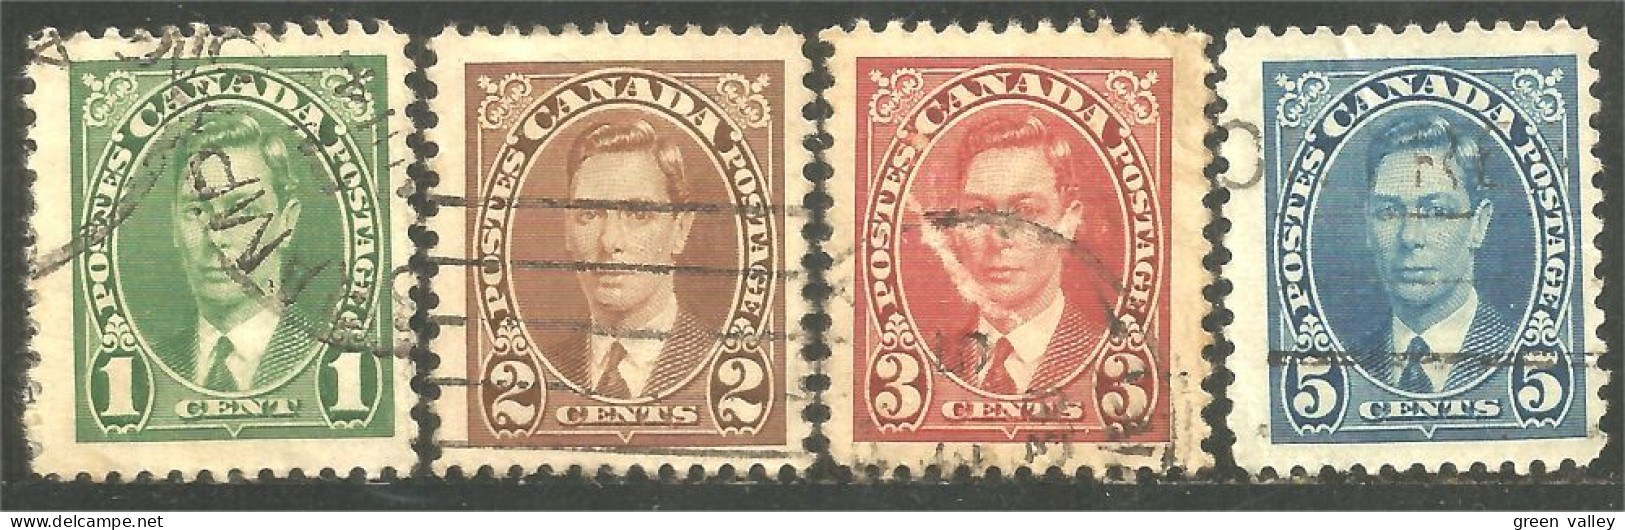 951 Canada 1937 King Roi George VI Mufti Issue 4 Timbres Stamps (484b) - Gebraucht